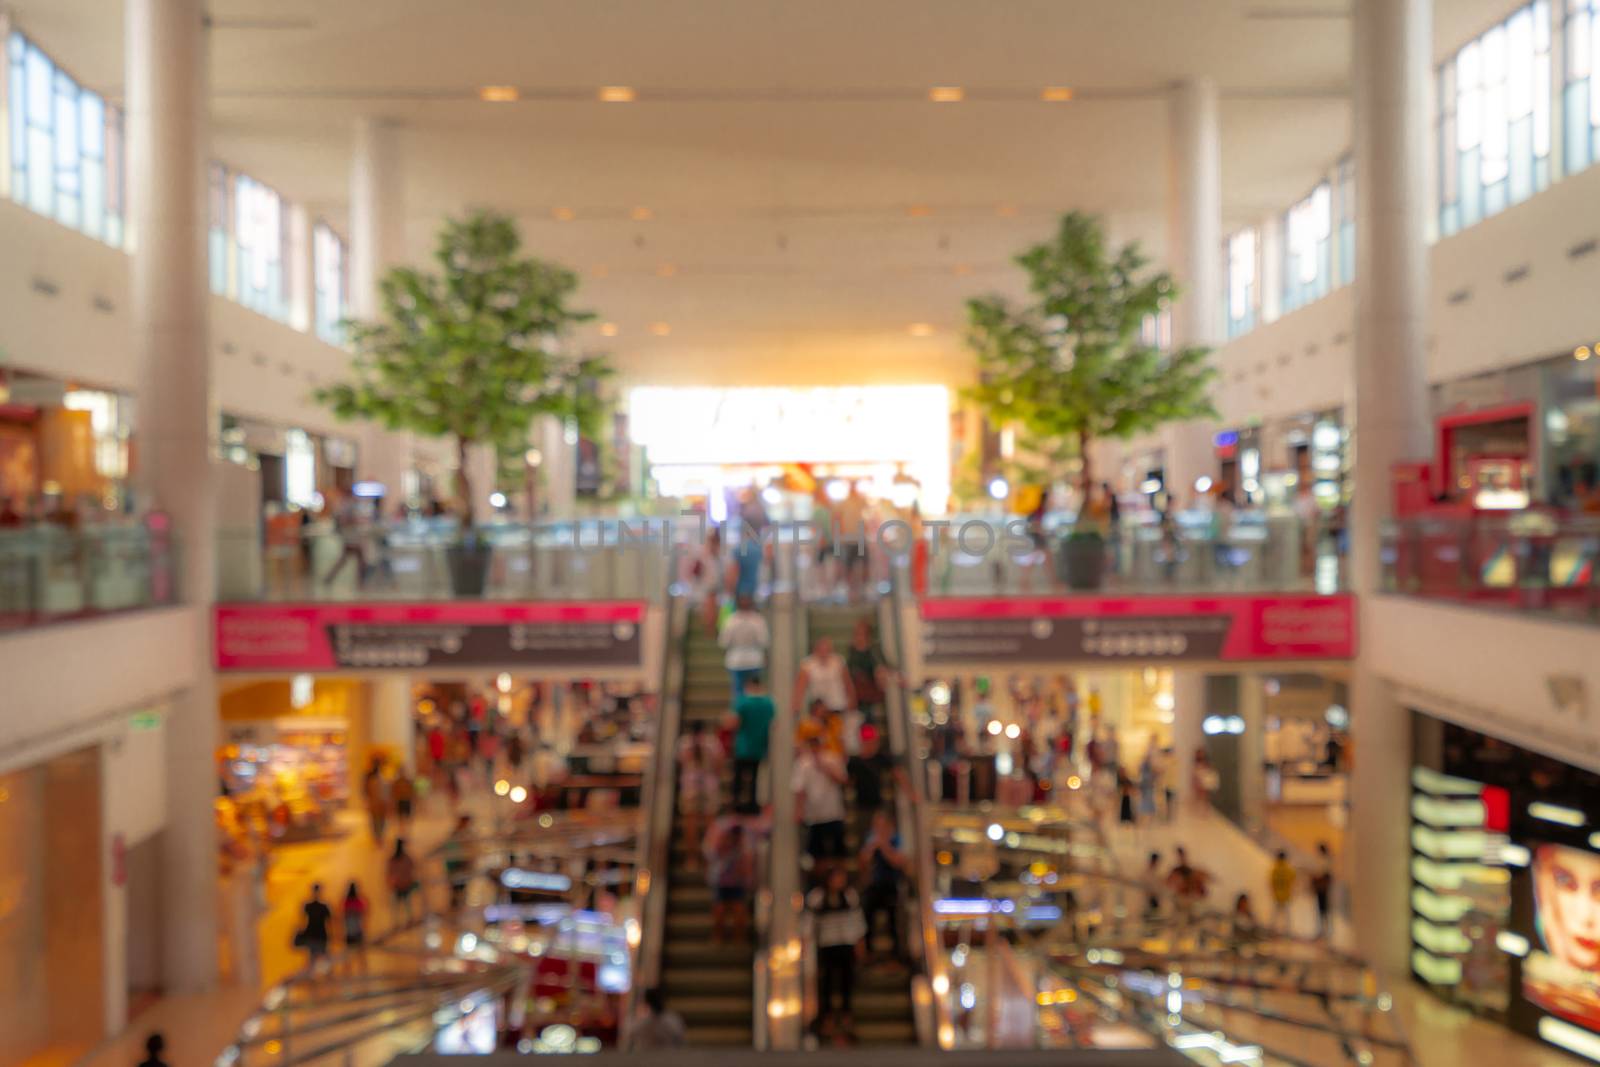 Blurred shopping mall background. People walking and shopping on holiday. People in escalators at the modern shopping mall that second floor decorated with two trees for fresh environment. by Fahroni